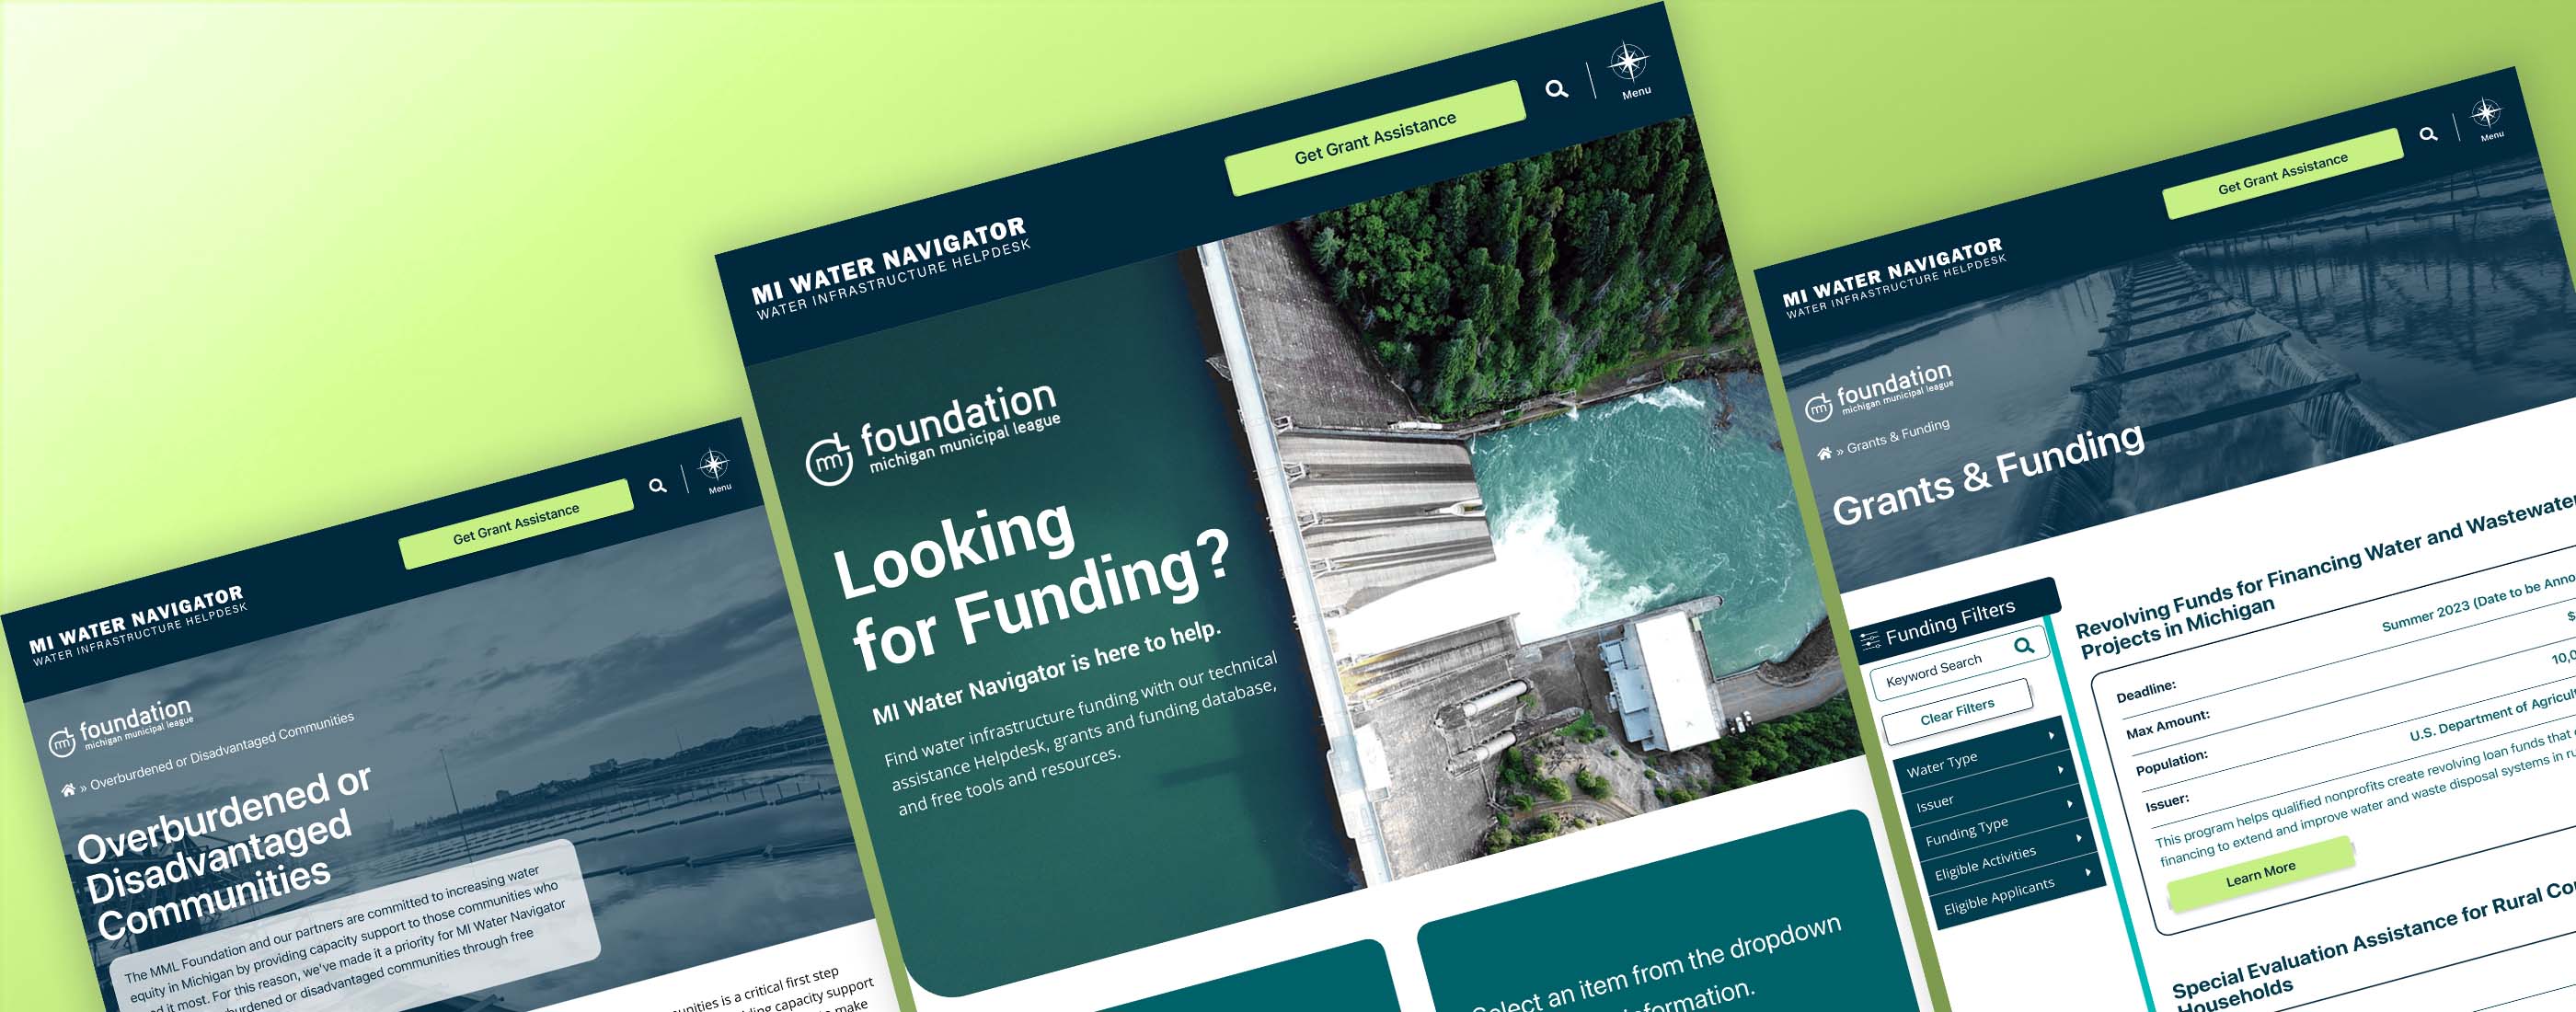 Screenshots of three pages of the MI Water Navigator website, which launched in 2022